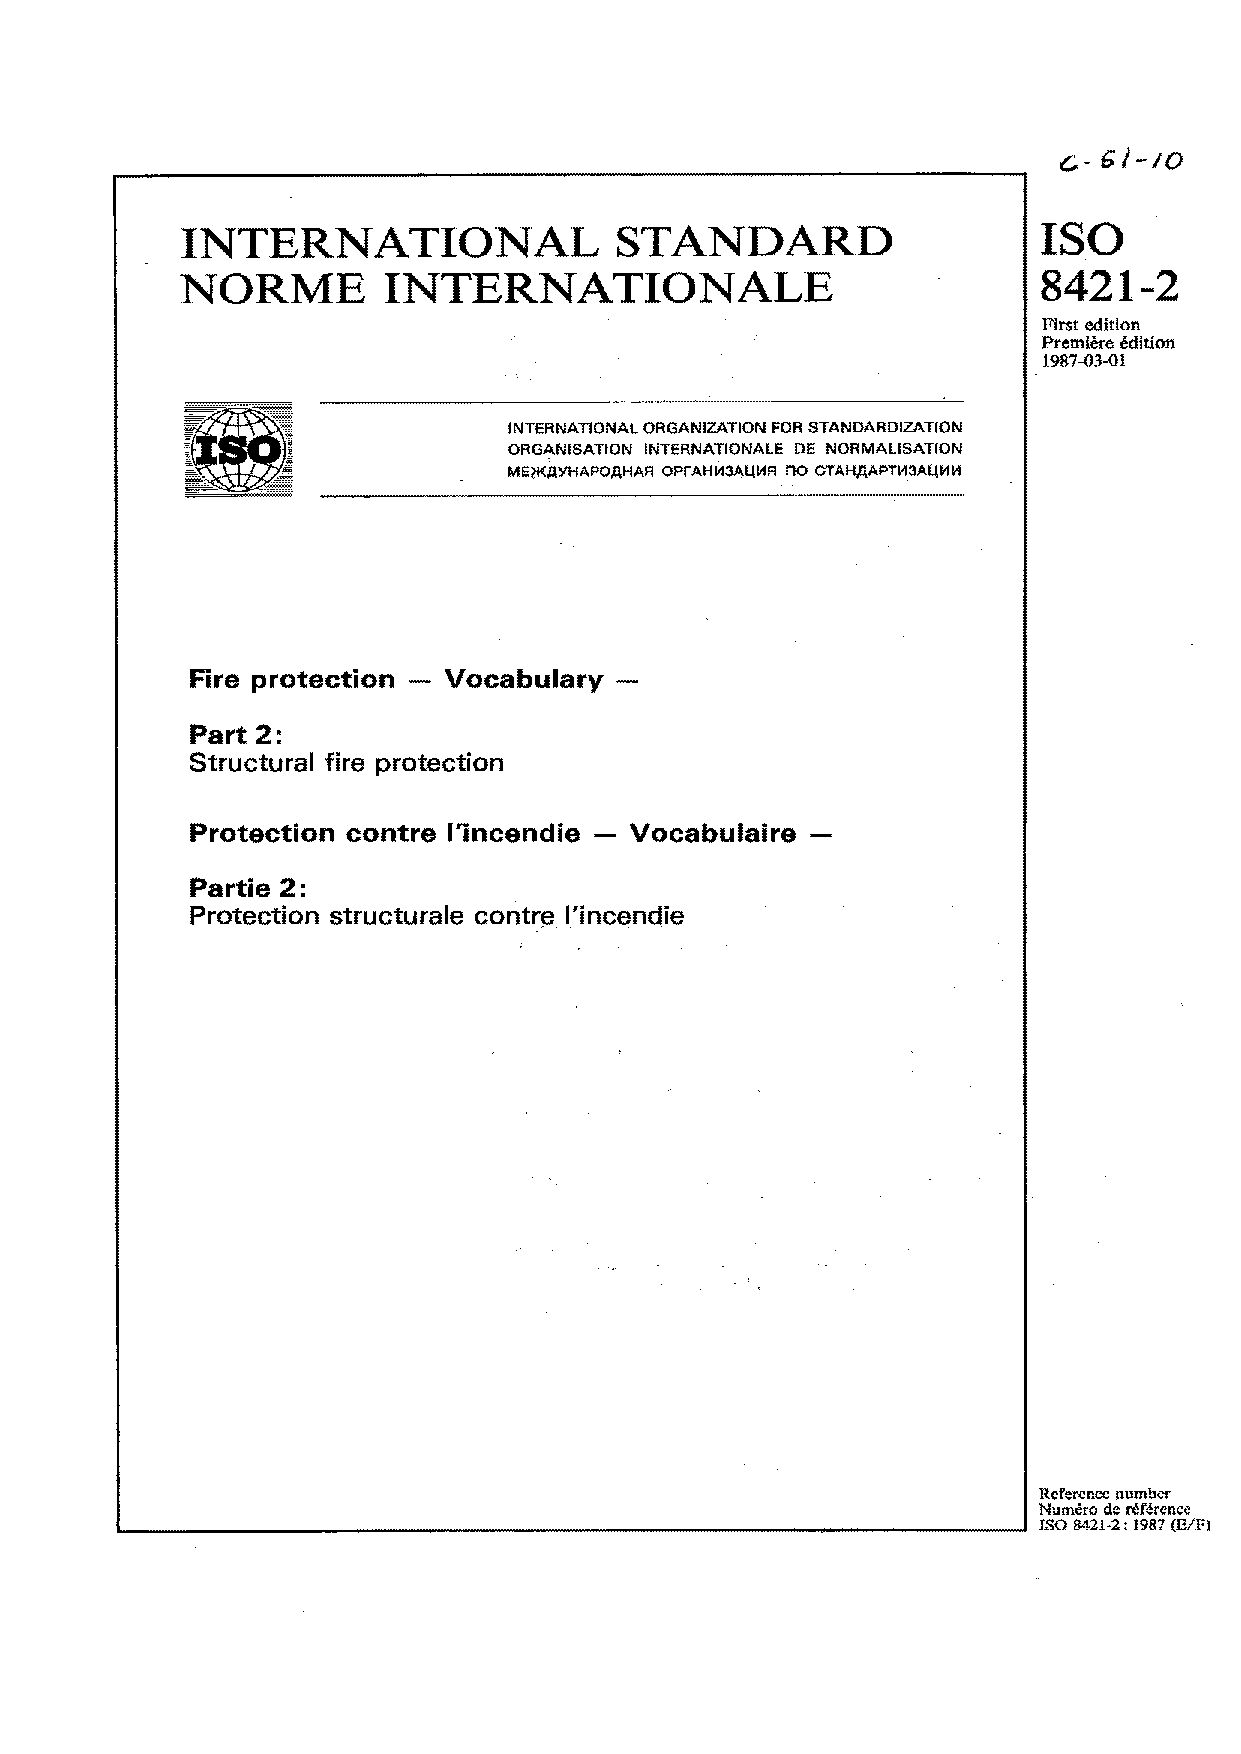 ISO 8421-2:1987